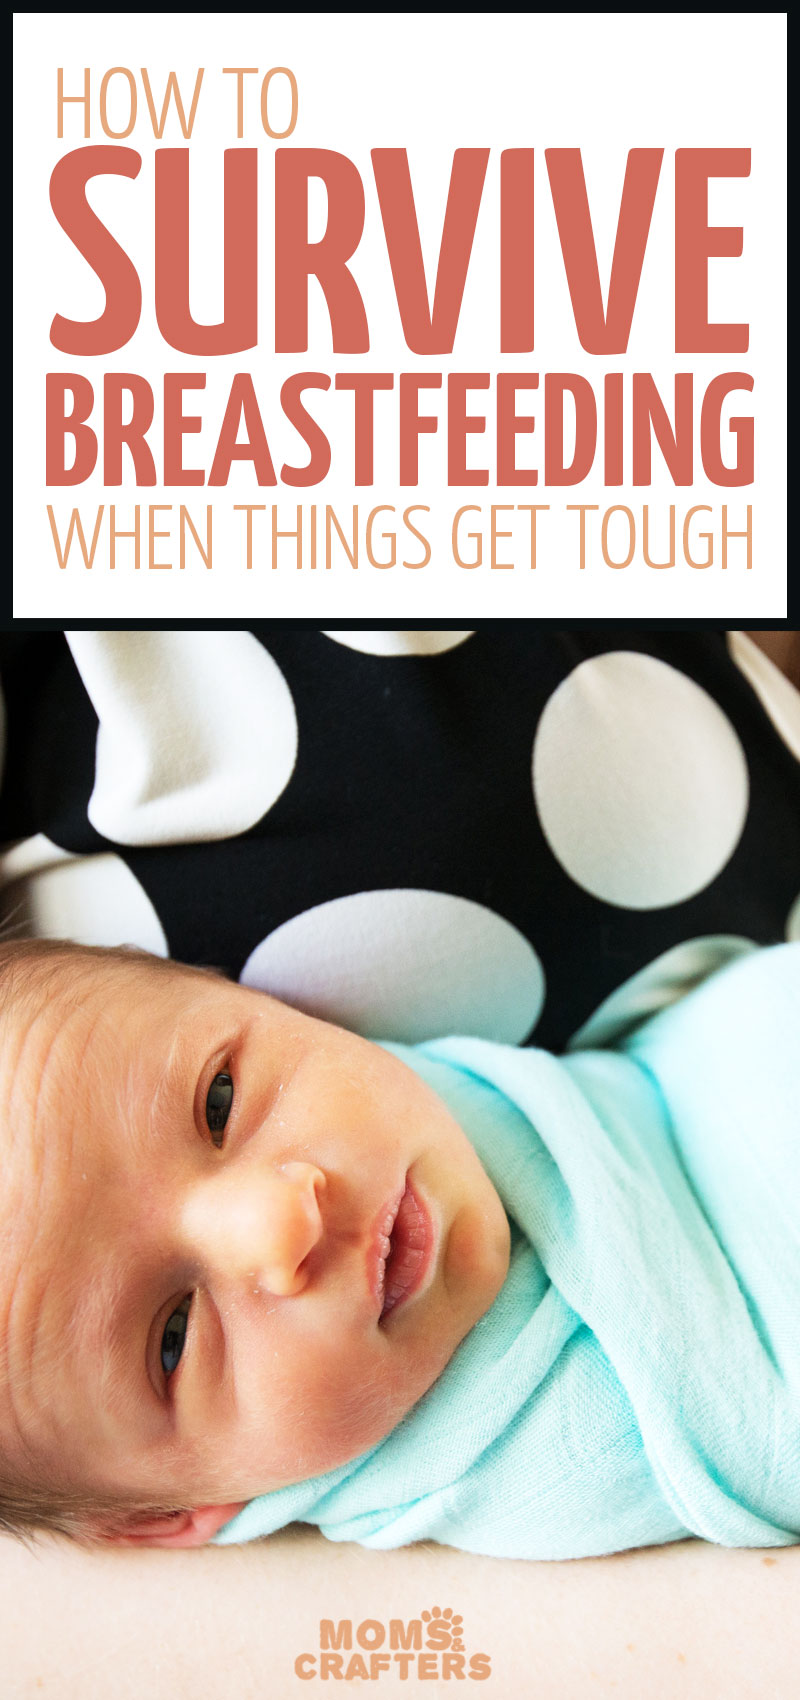 They told me it would come naturally, but it really didn't... I wish I'd read this survival guide for breastfeeding a newborn before I tried! These breastfeeding tips are so valuable, and coming from a fellow mom, it's relatable, and amazing parenting tips for new or pregnant mothers...